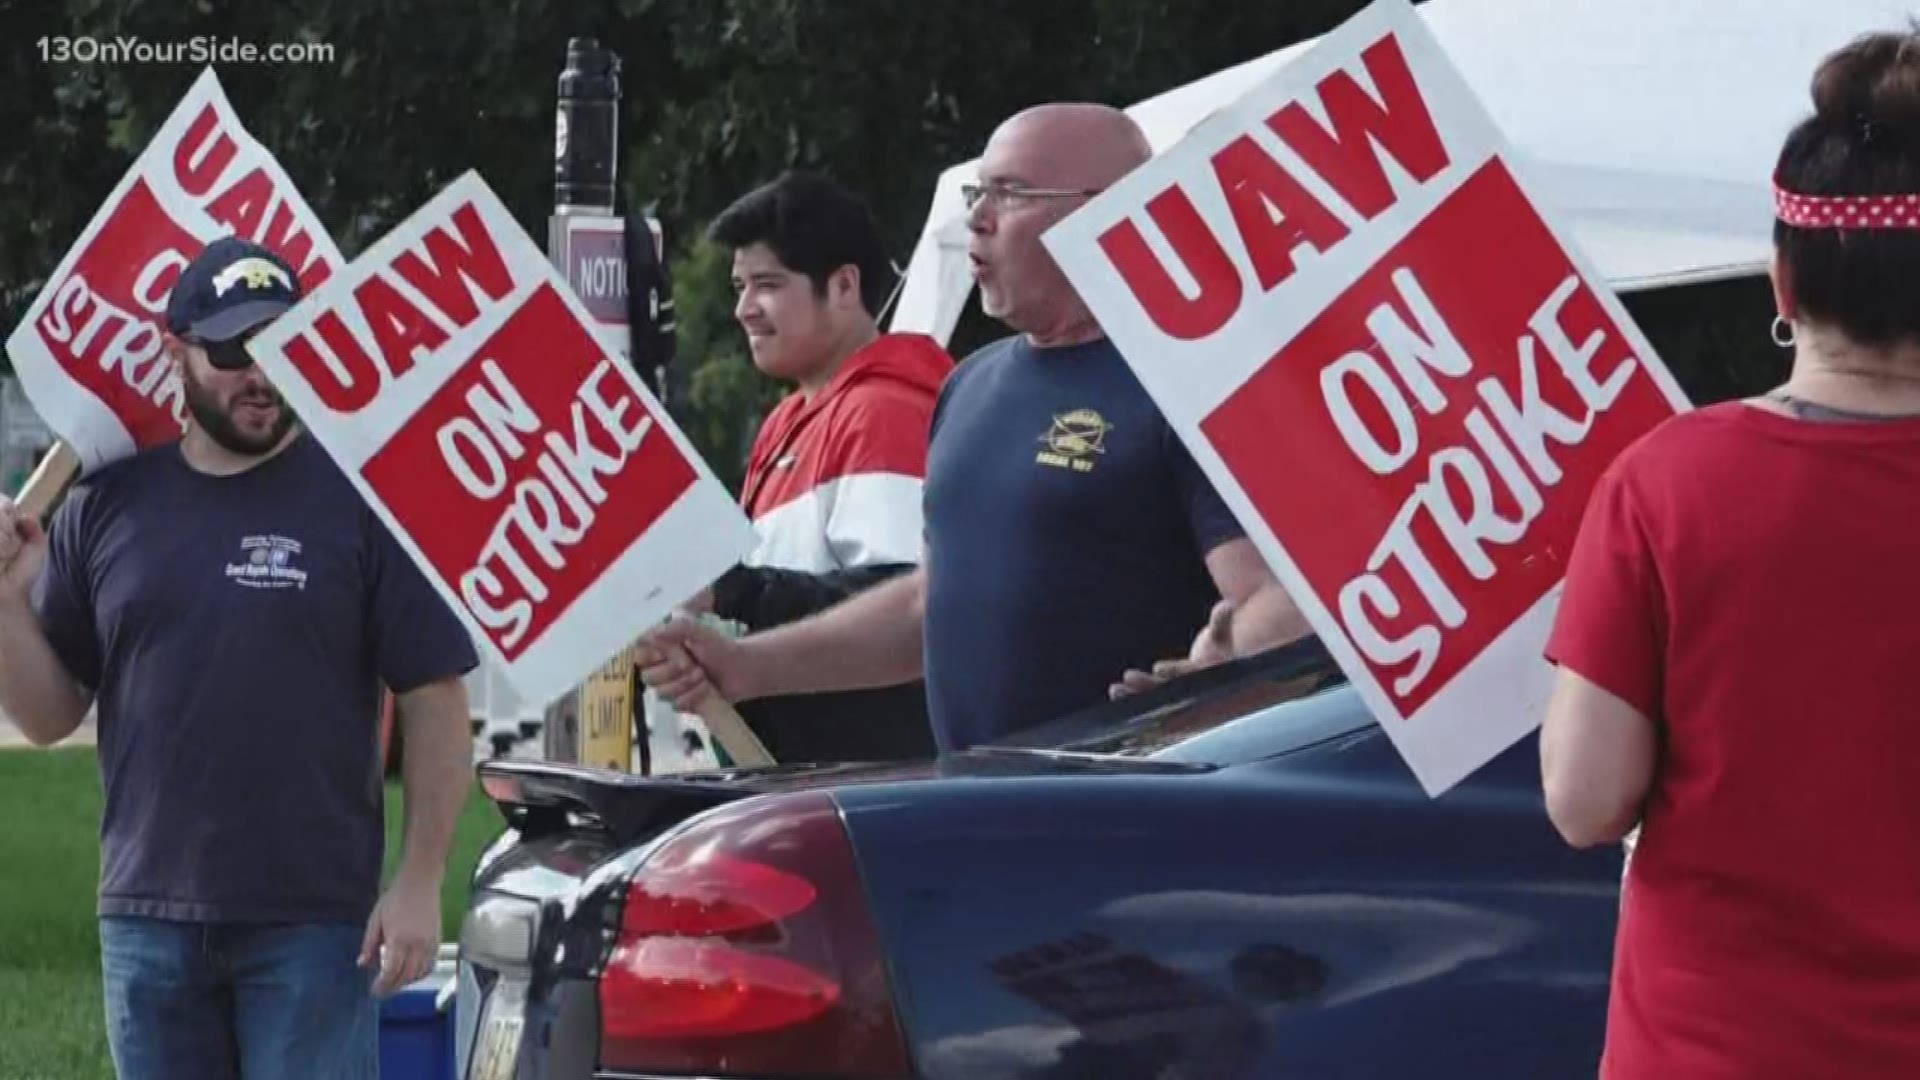 Local teachers showed their solidarity with UAW picketers.